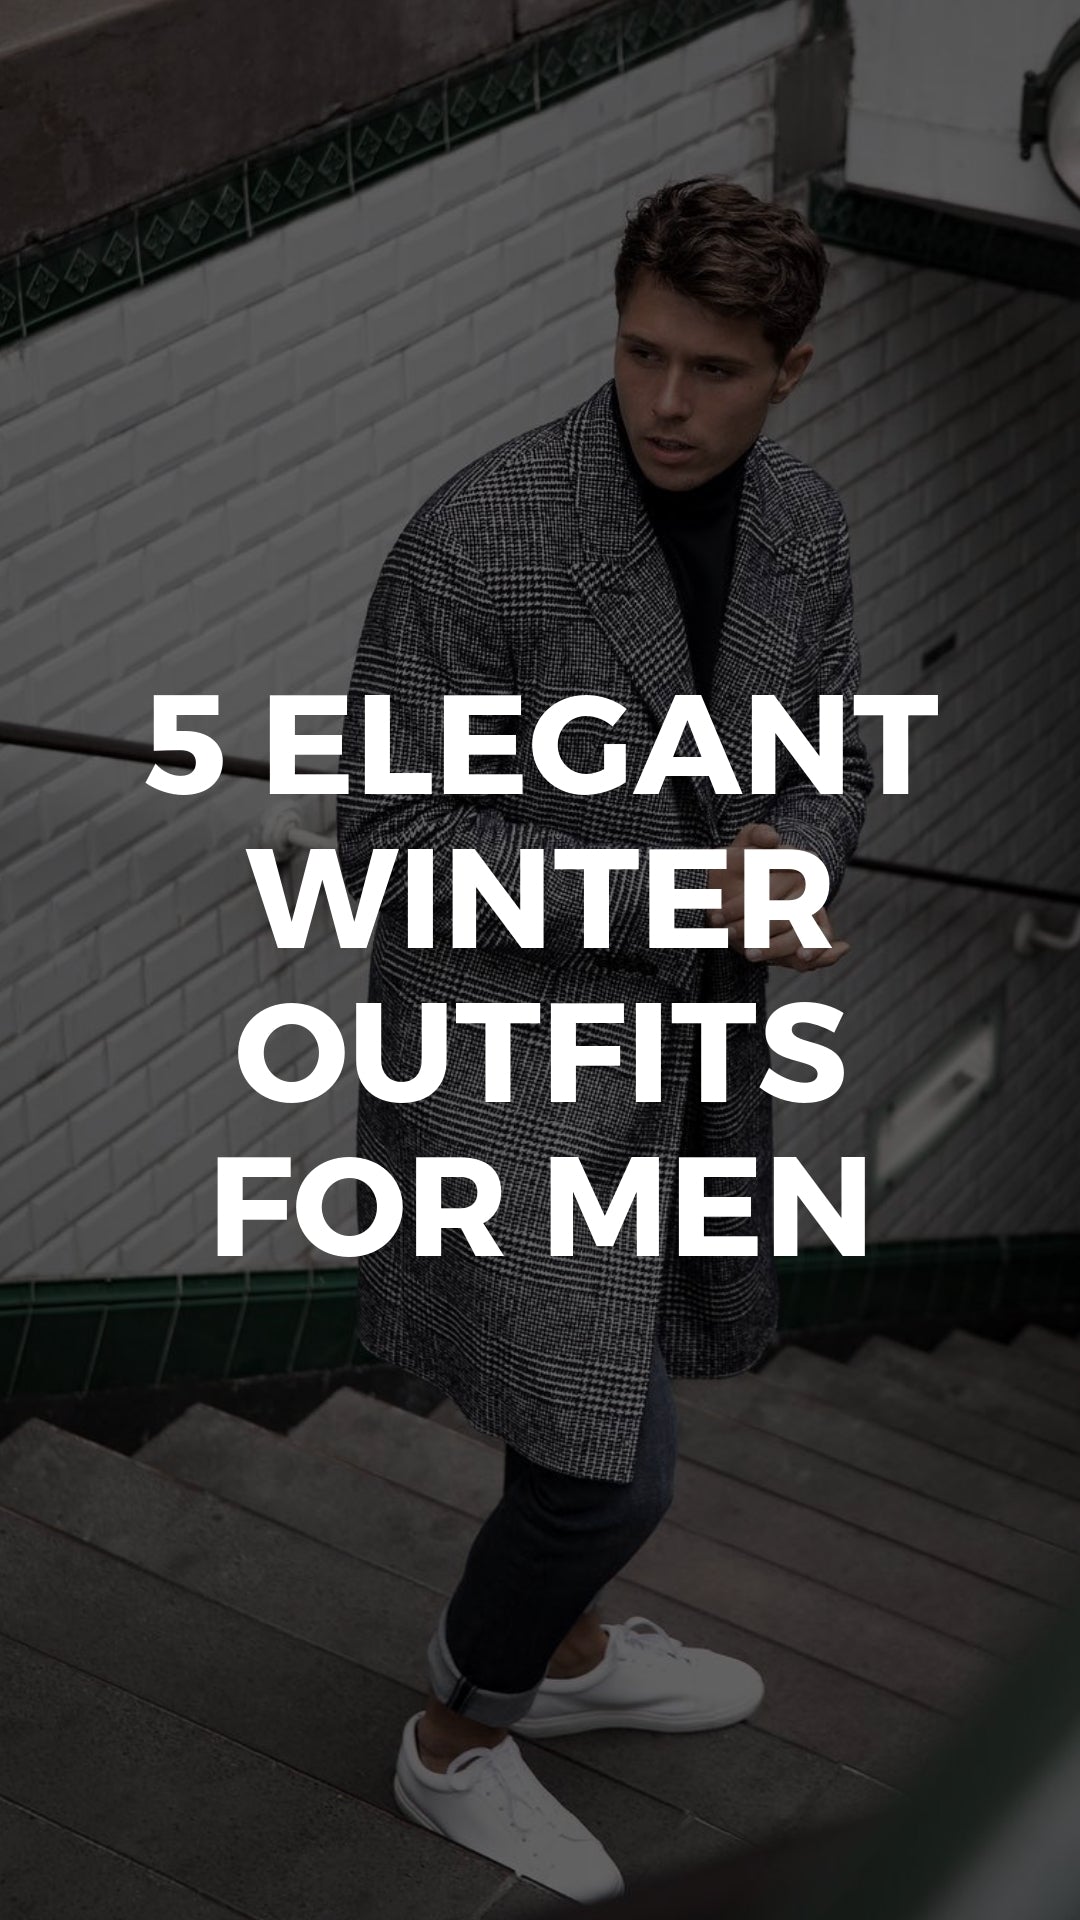 Want to look sharp this winter? Try these 5 elegant outfits that'll ...